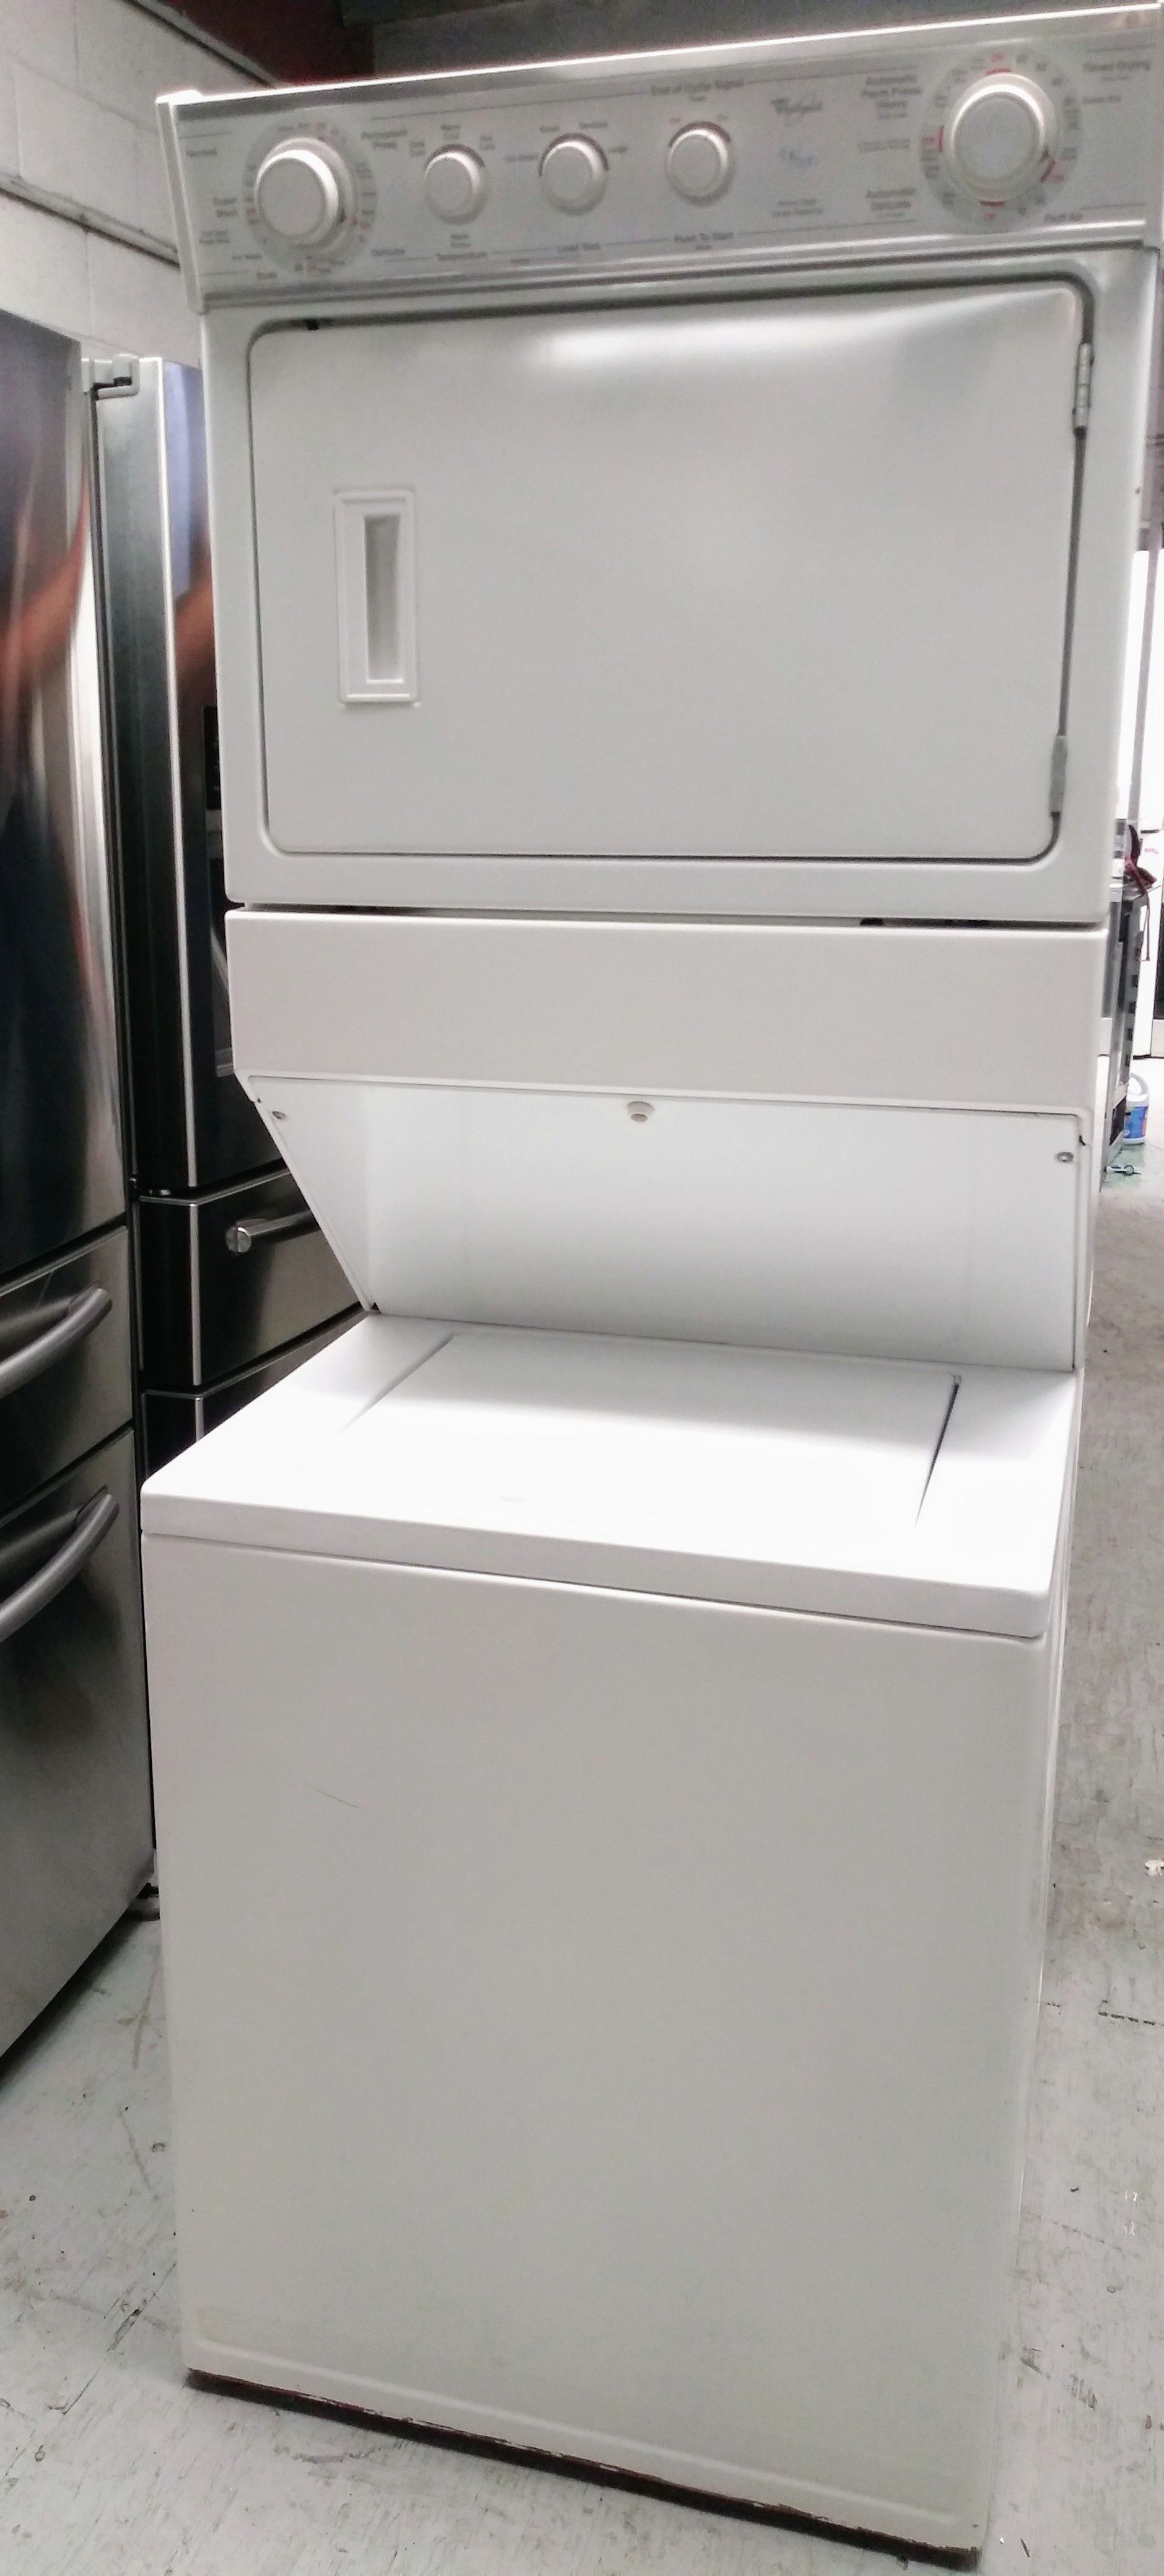 STACKABLE🎉WHIRLPOOL GAS LAUNDRY CENTER🎉27INCH🎉ENERGY STAR